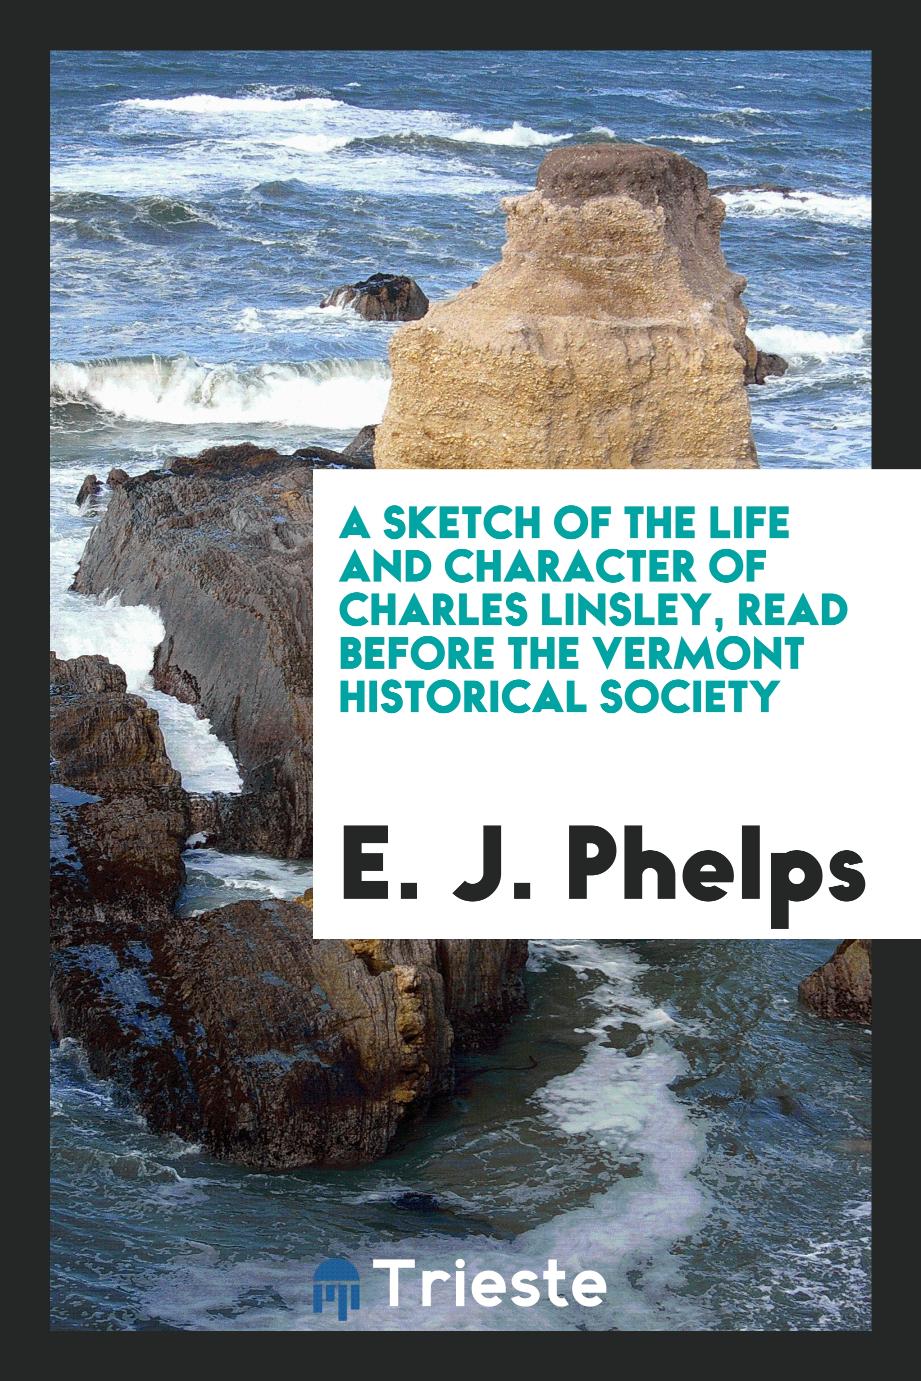 A sketch of the life and character of Charles Linsley, read before the Vermont Historical Society